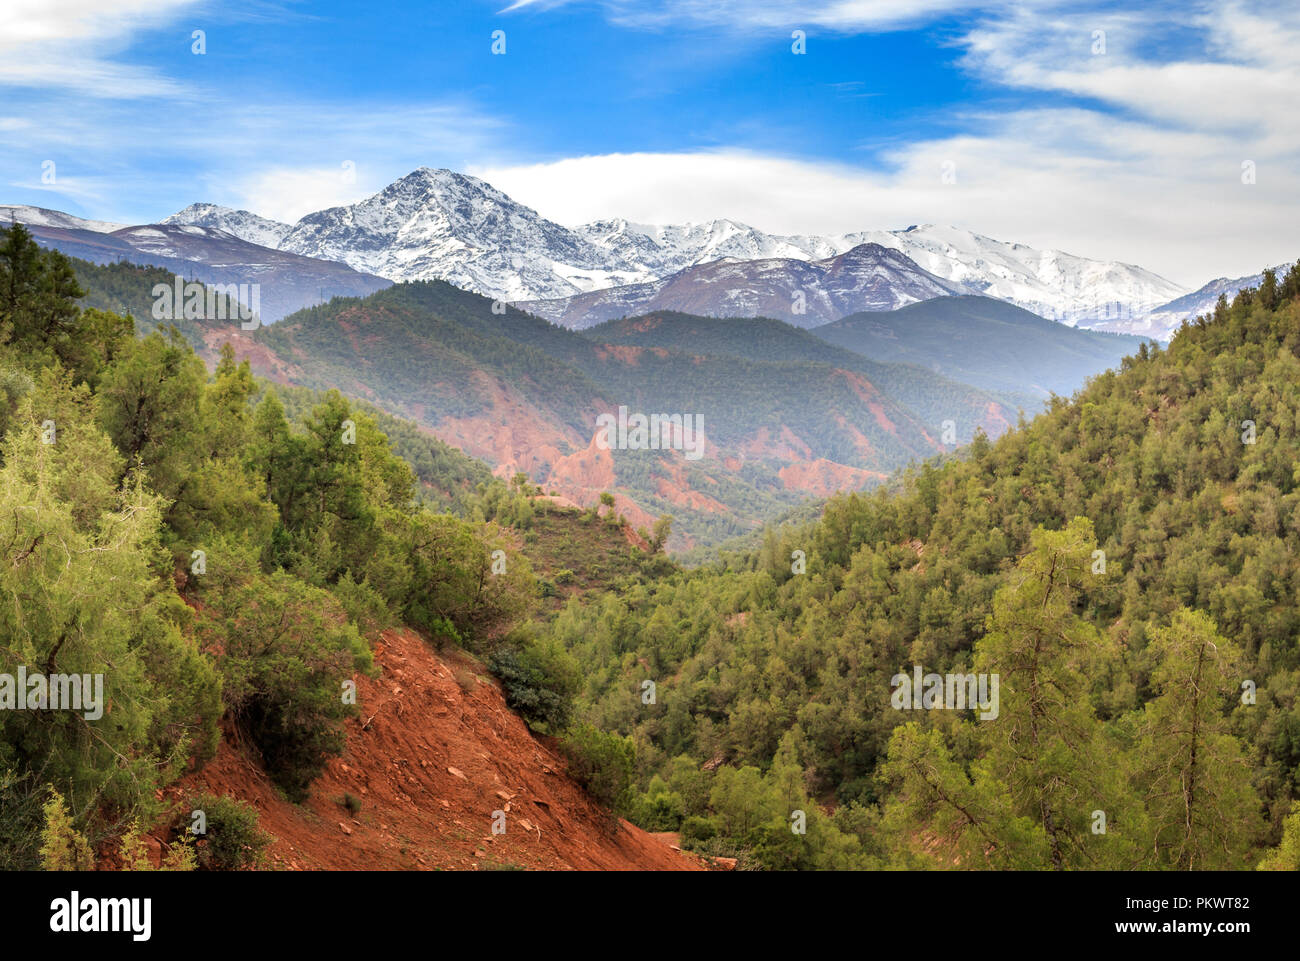 colorful panoramic view of High Atlas mountains in Morocco with snowy Peaks in the background Stock Photo